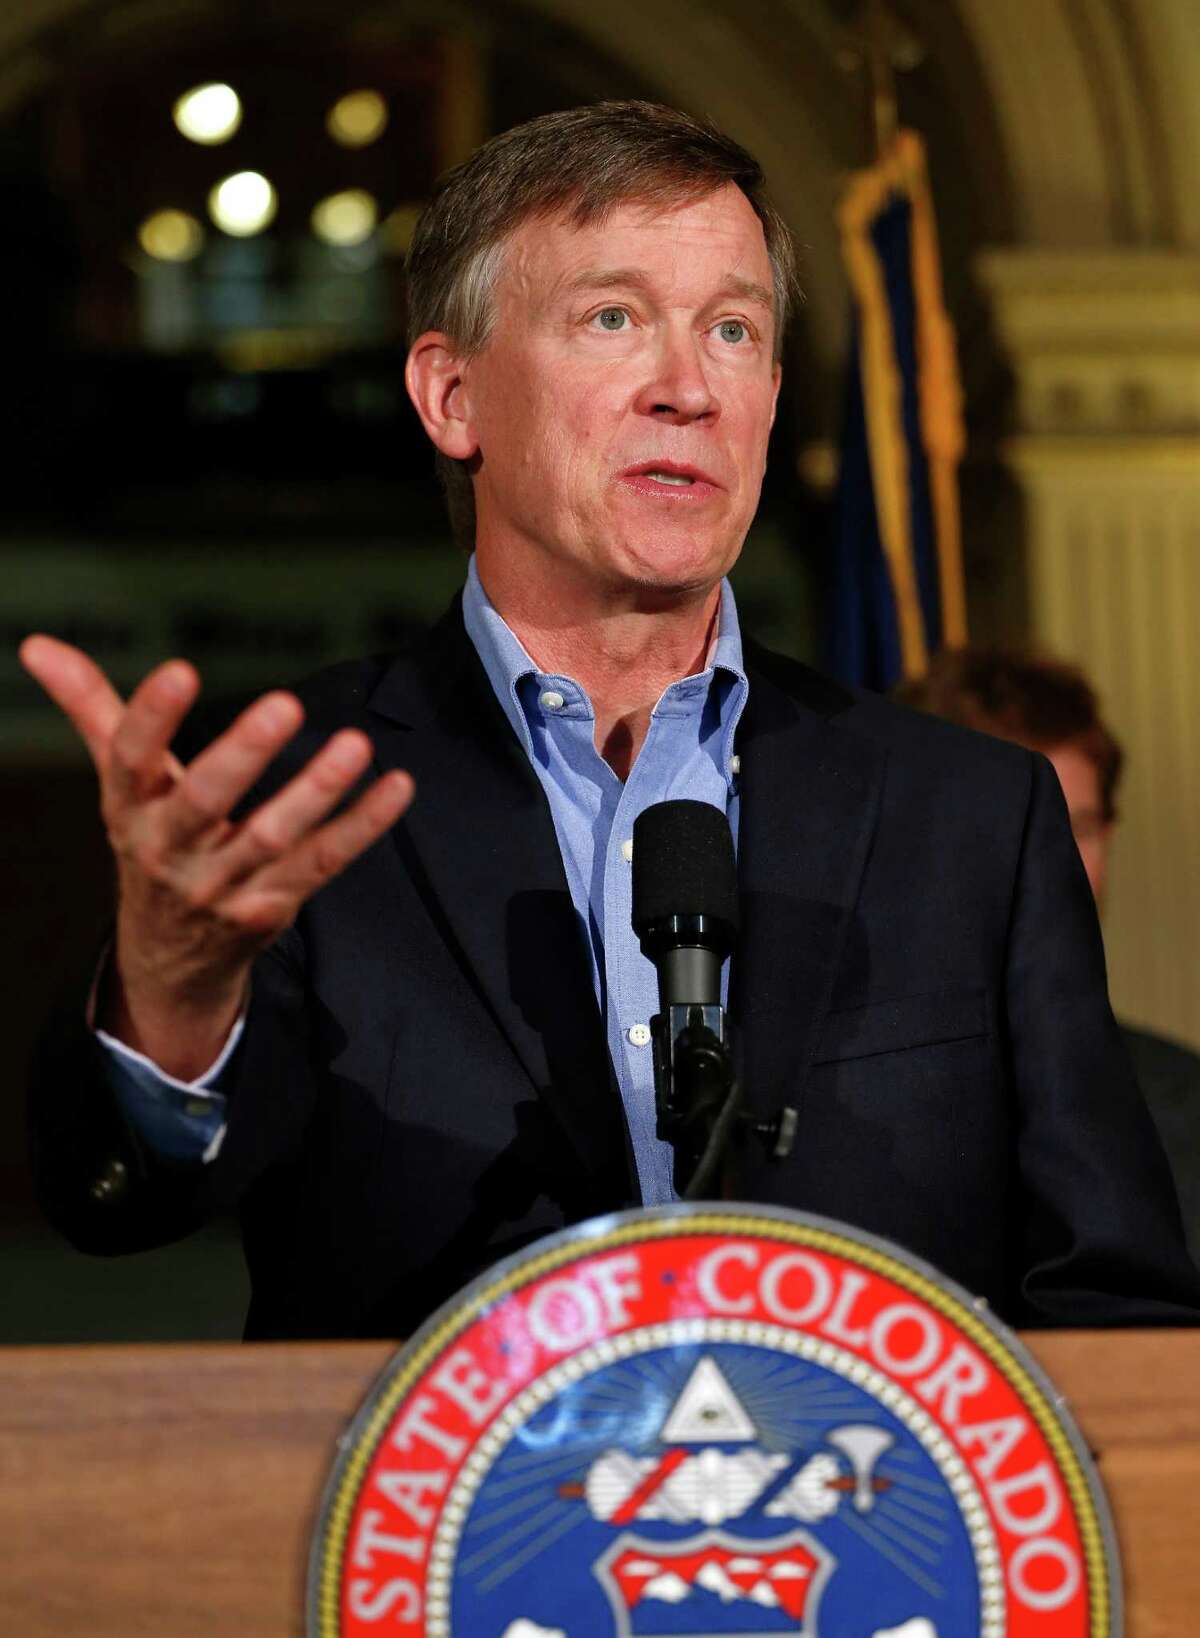 Former Colorado governor John Hickenlooper, a Democrat, announced earlier this year he is running for president in 2020.